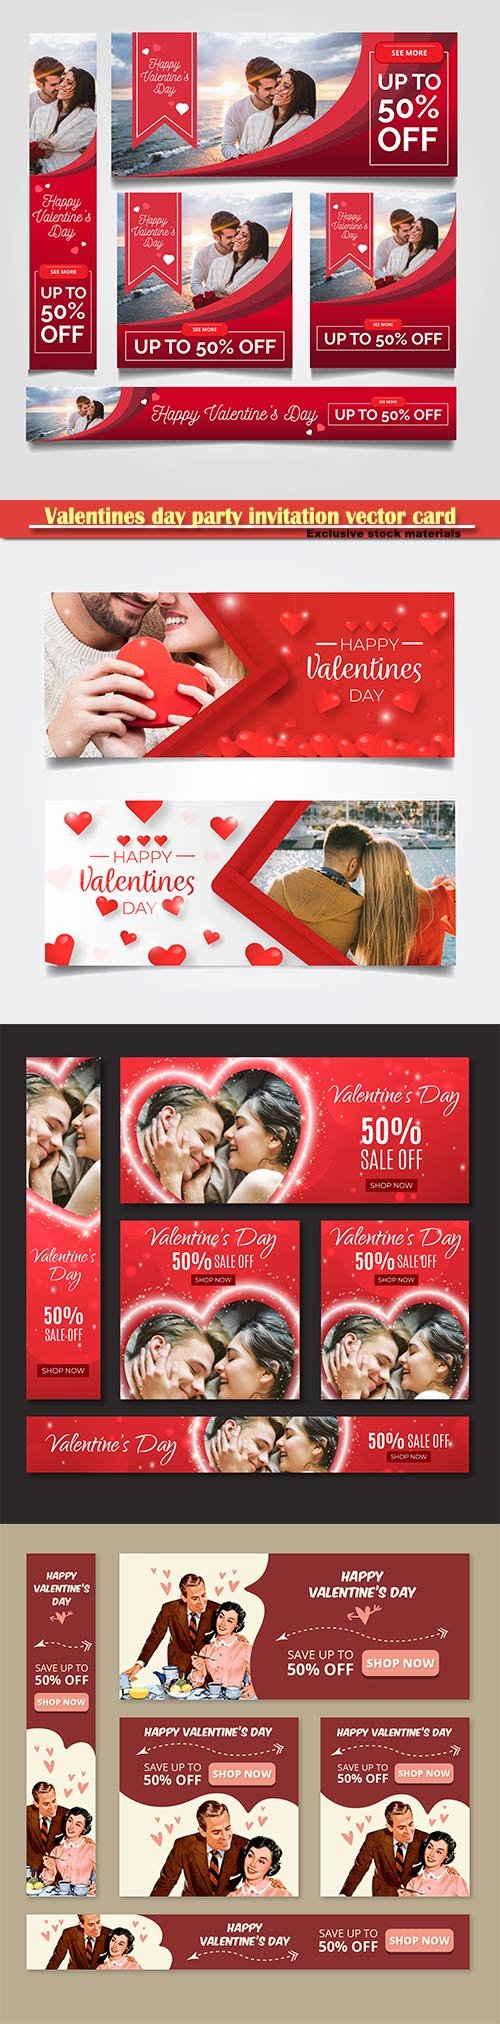 Valentines day party invitation vector card # 56